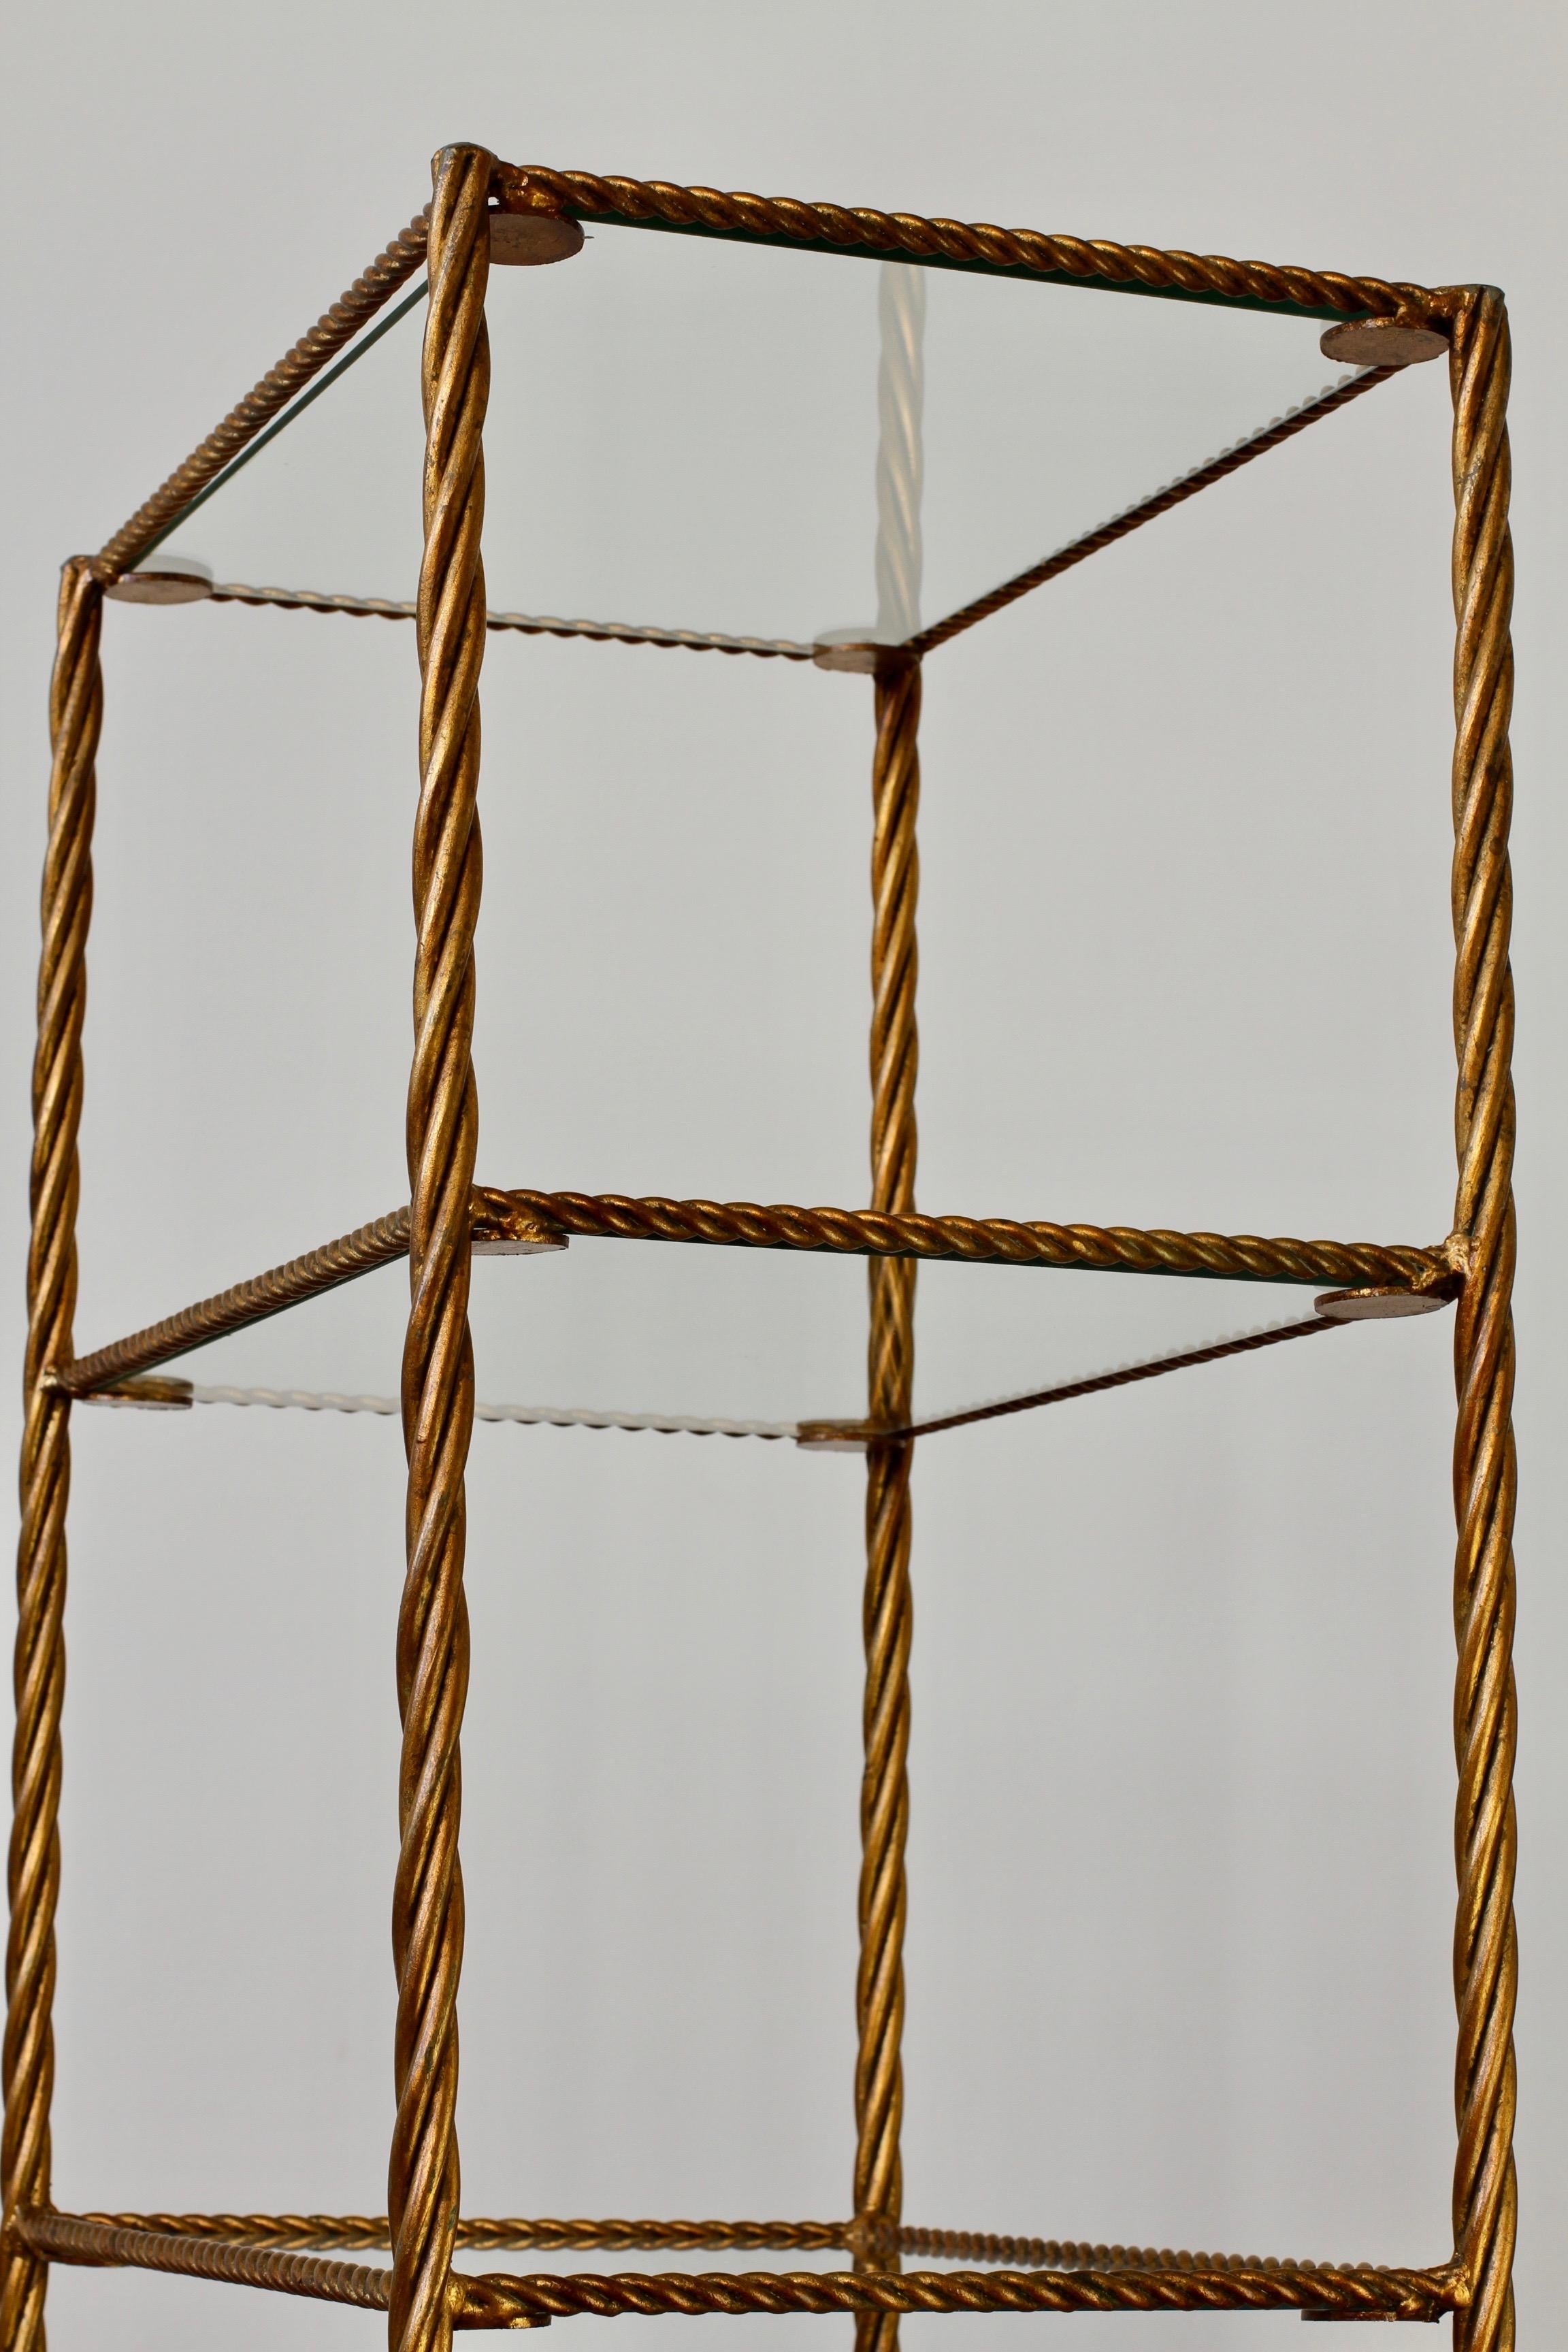 20th Century Vintage 1950s Hollywood Regency Gilt Wrought Iron Rope & Tassel Shelves or Stand